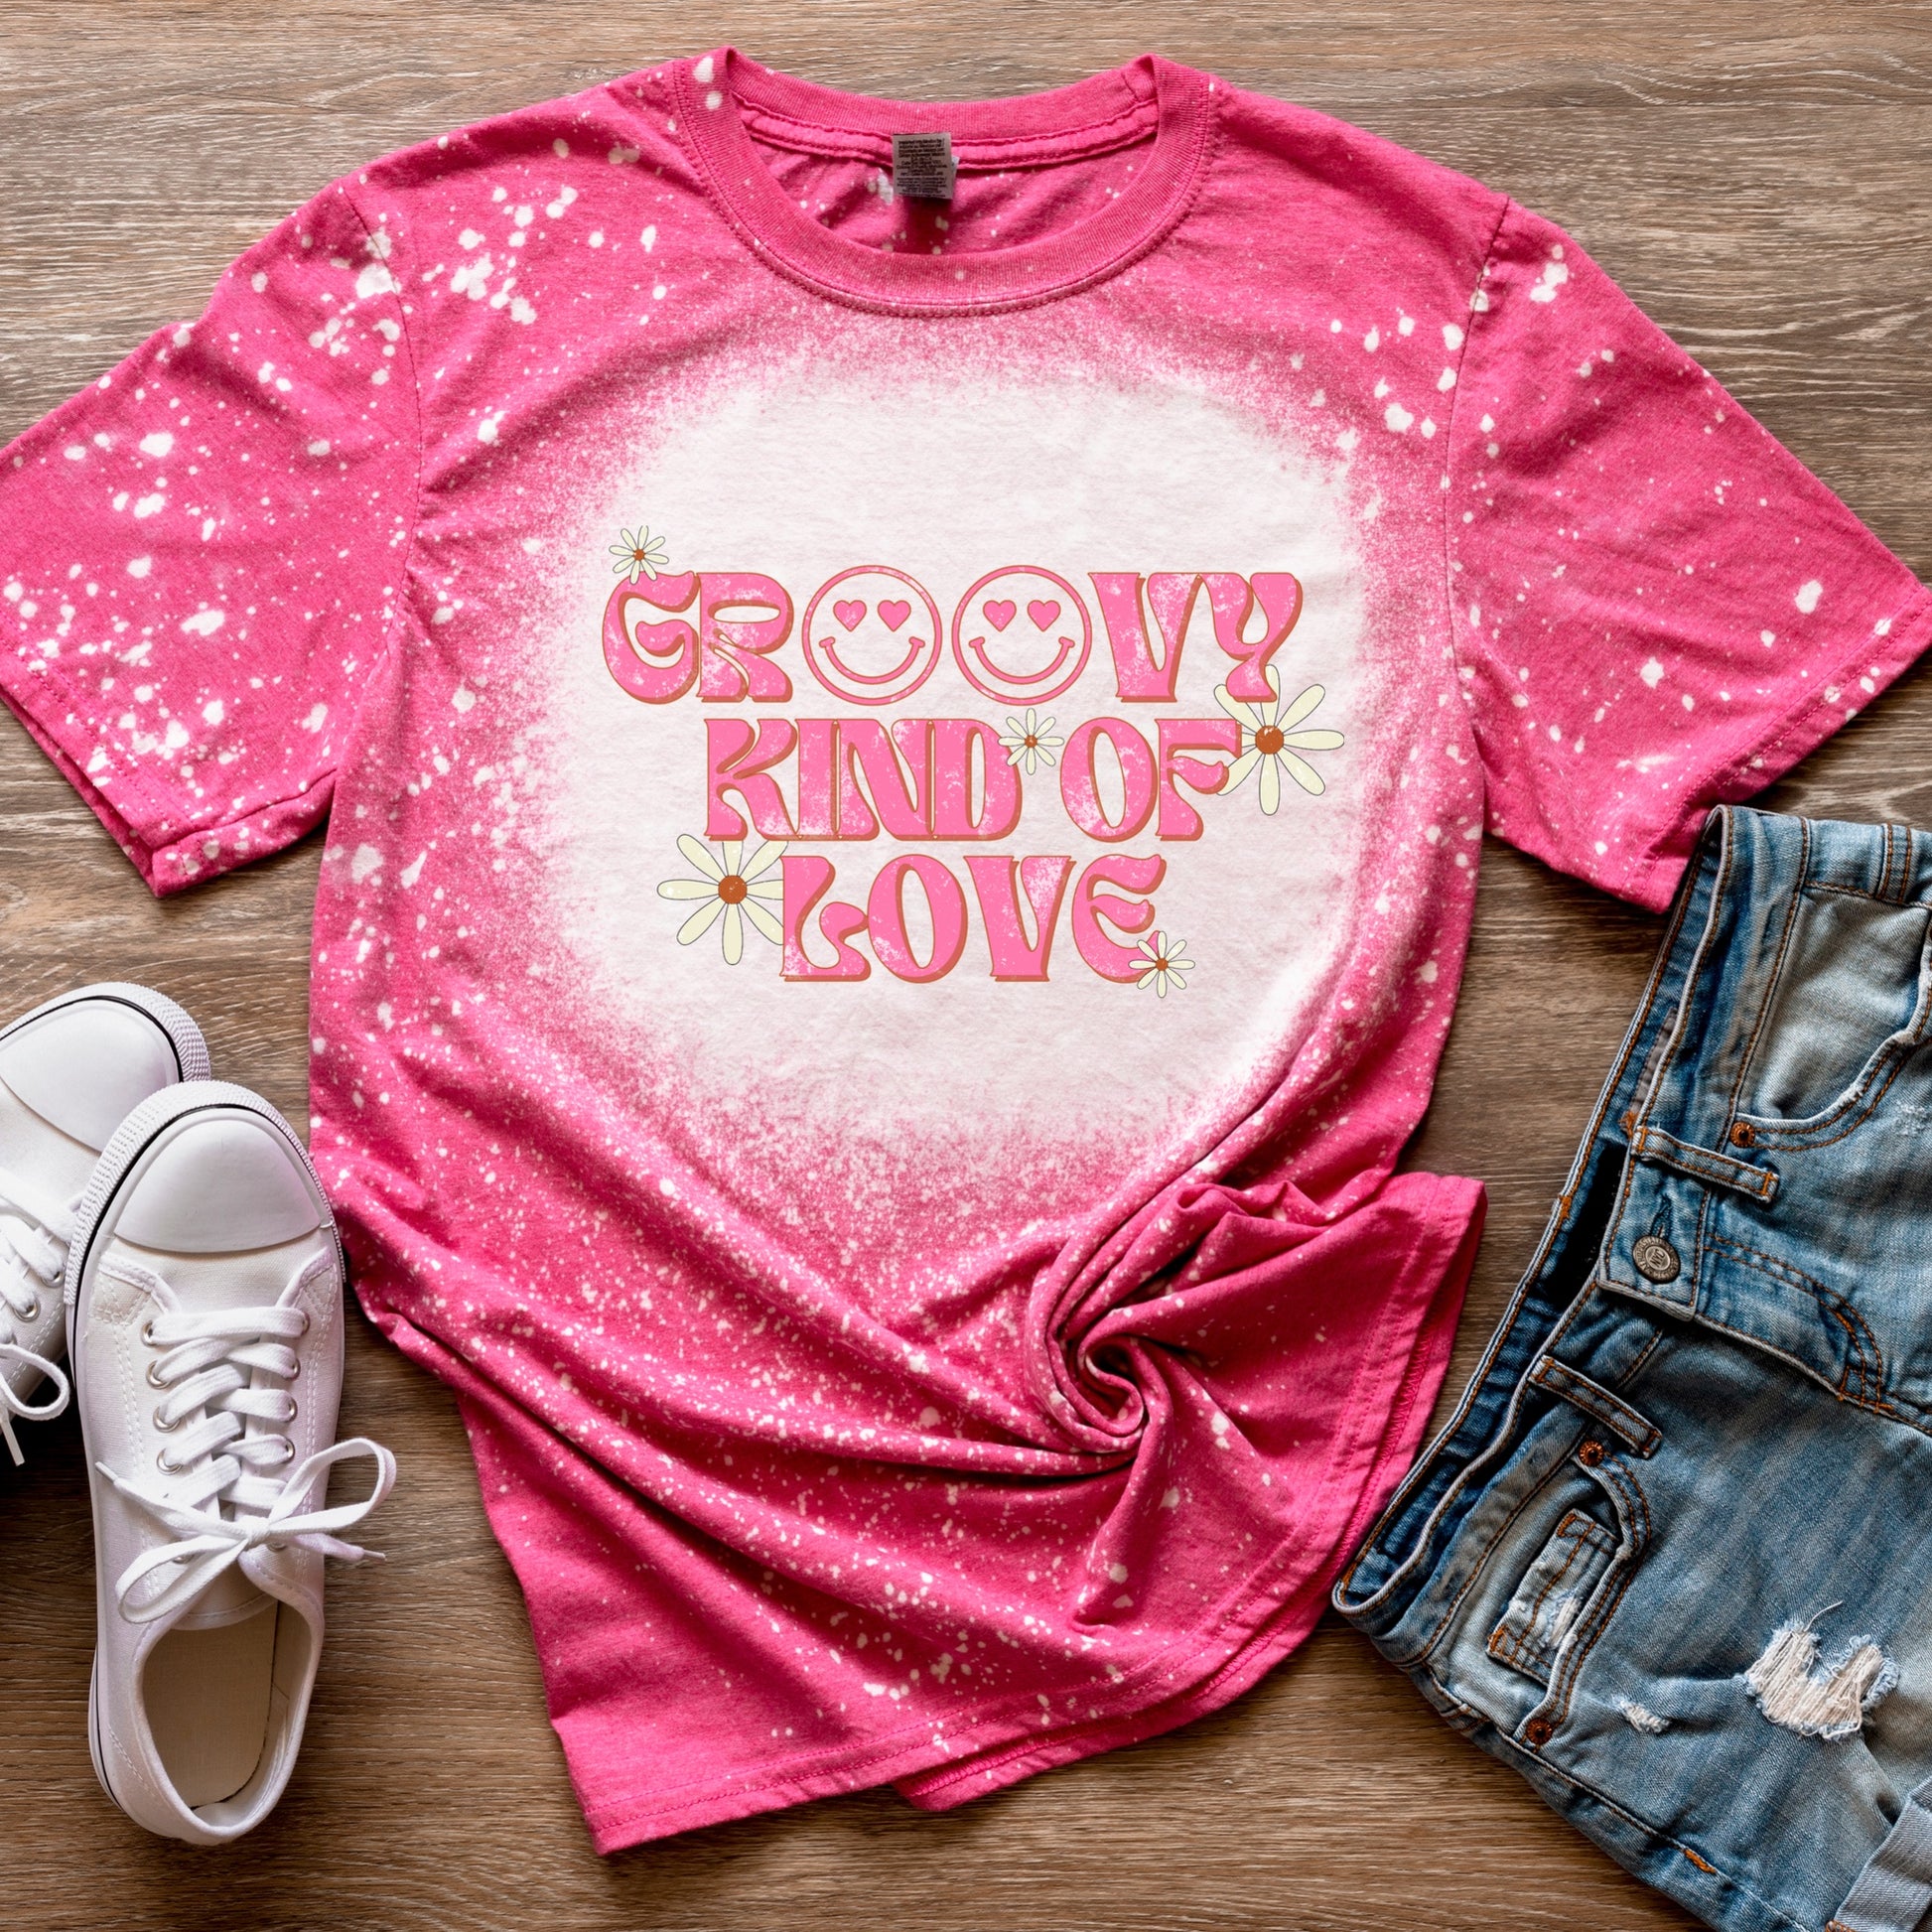 Pink shirt with flowers that says groovy kind of love - iron on transfer